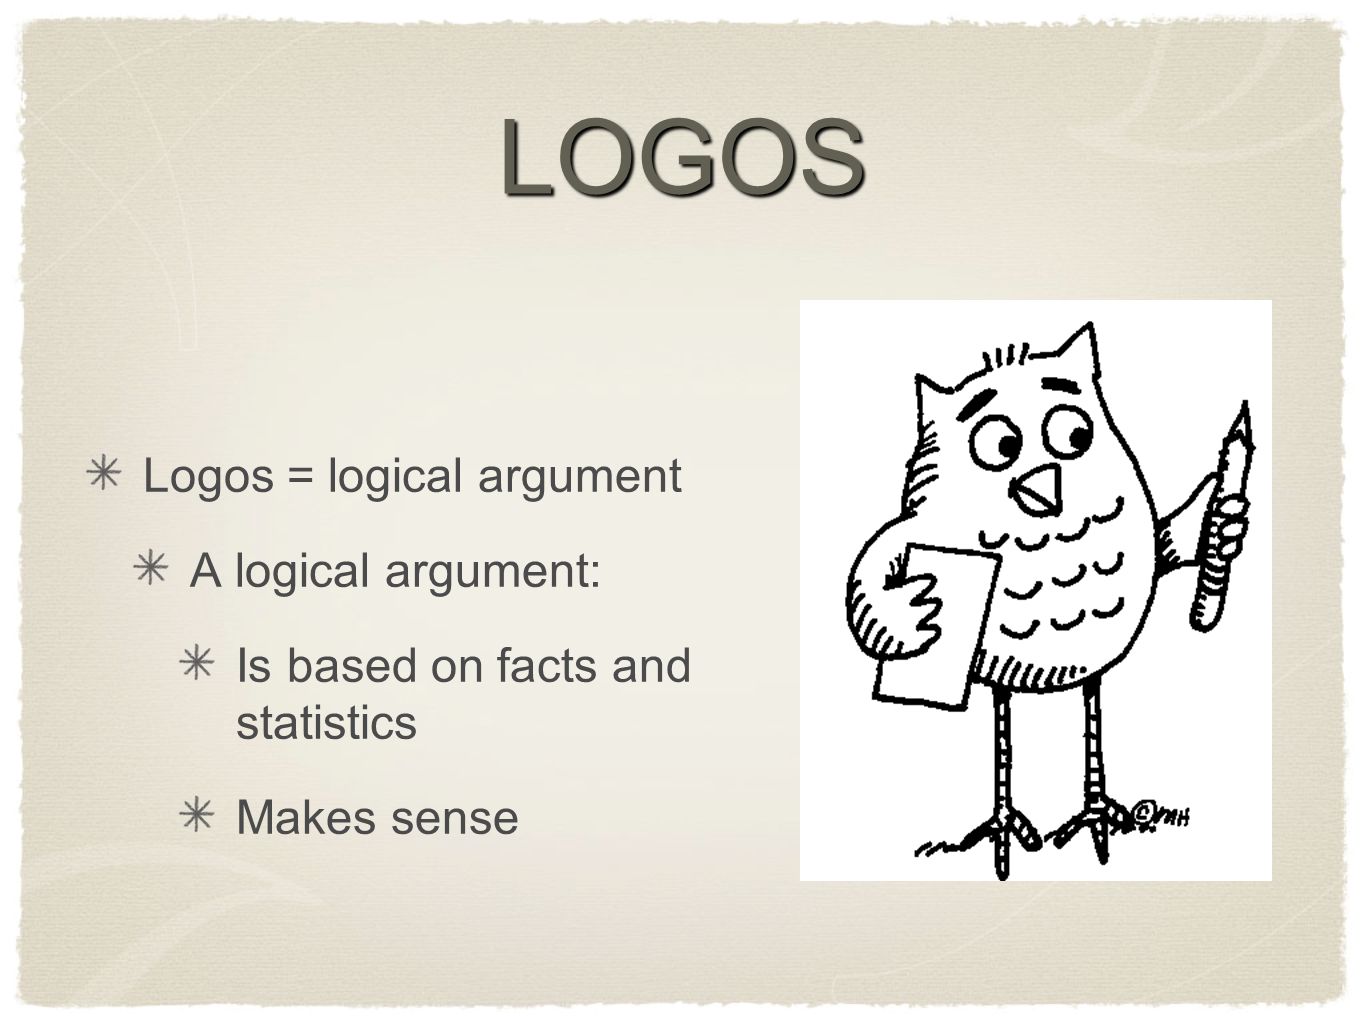 LOGOS Logos = logical argument A logical argument: Is based on facts and statistics Makes sense